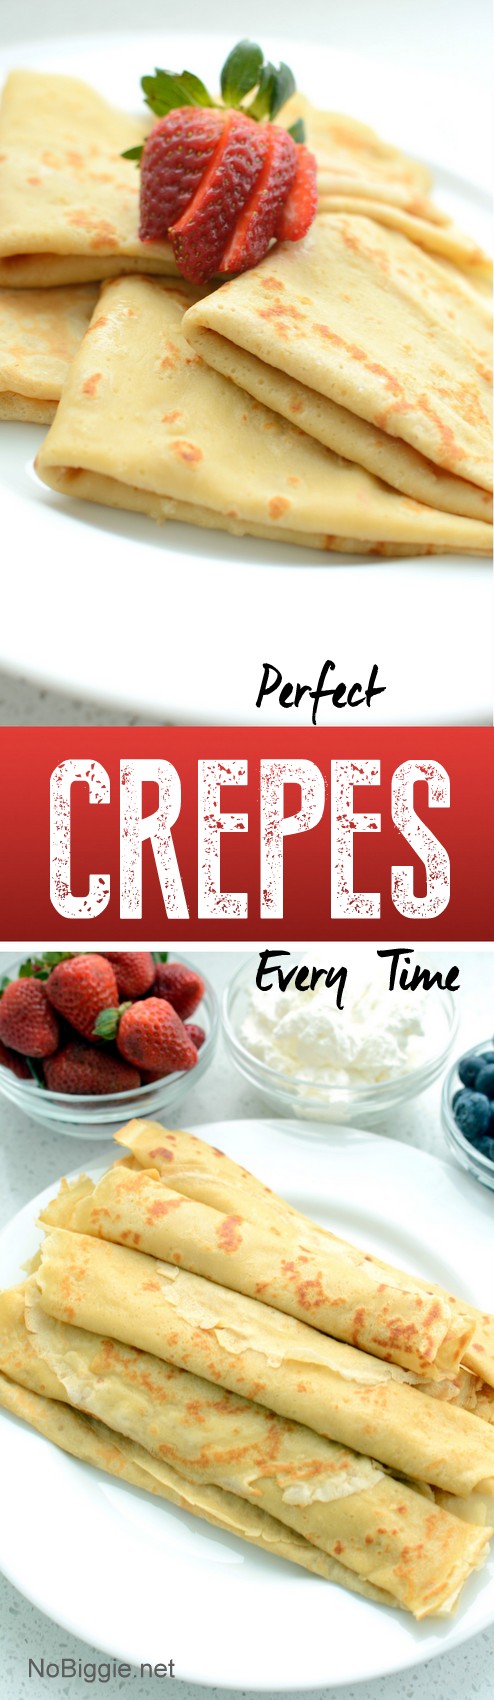 http://www.nobiggie.net/wp-content/uploads/2017/01/perfect-crepes-every-time.jpg